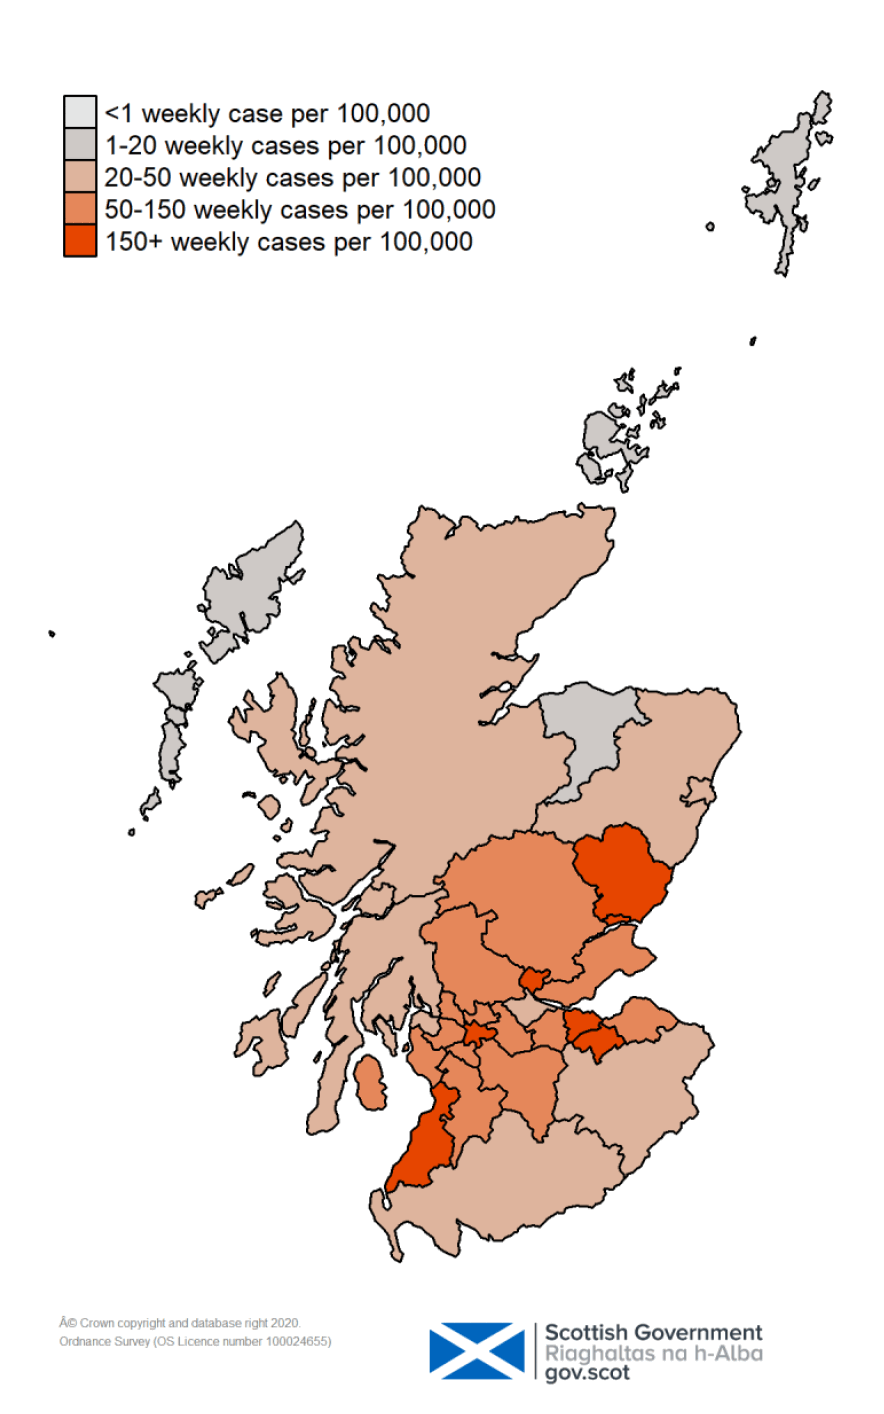 This colour coded map of Scotland shows the different rates of weekly positive cases per 100,000 people across Scotland’s Local Authorities. The colours range from light grey for under 1 weekly case, through dark grey for 1 to 20 weekly cases, light orange for 20 to 50 weekly cases, dark orange for 50 to 150 weekly cases and red for over 150 weekly cases per 100,000 people. 
Angus, Clackmannanshire, Dundee, Edinburgh, Glasgow, Midlothian and South Ayrshire are all shown as red on the map. Aberdeen, Aberdeenshire, Argyle and Bute, Dumfries and Galloway, Falkirk, Highland, Inverclyde and Scottish Borders are shown as light orange. Moray, Na h-Eileanan Siar, Orkney and Shetland are all shown as dark grey. There are no Local Authorities shown as light grey, with no cases per 100,000 people. All other Local Authorities are showing as dark orange. 
